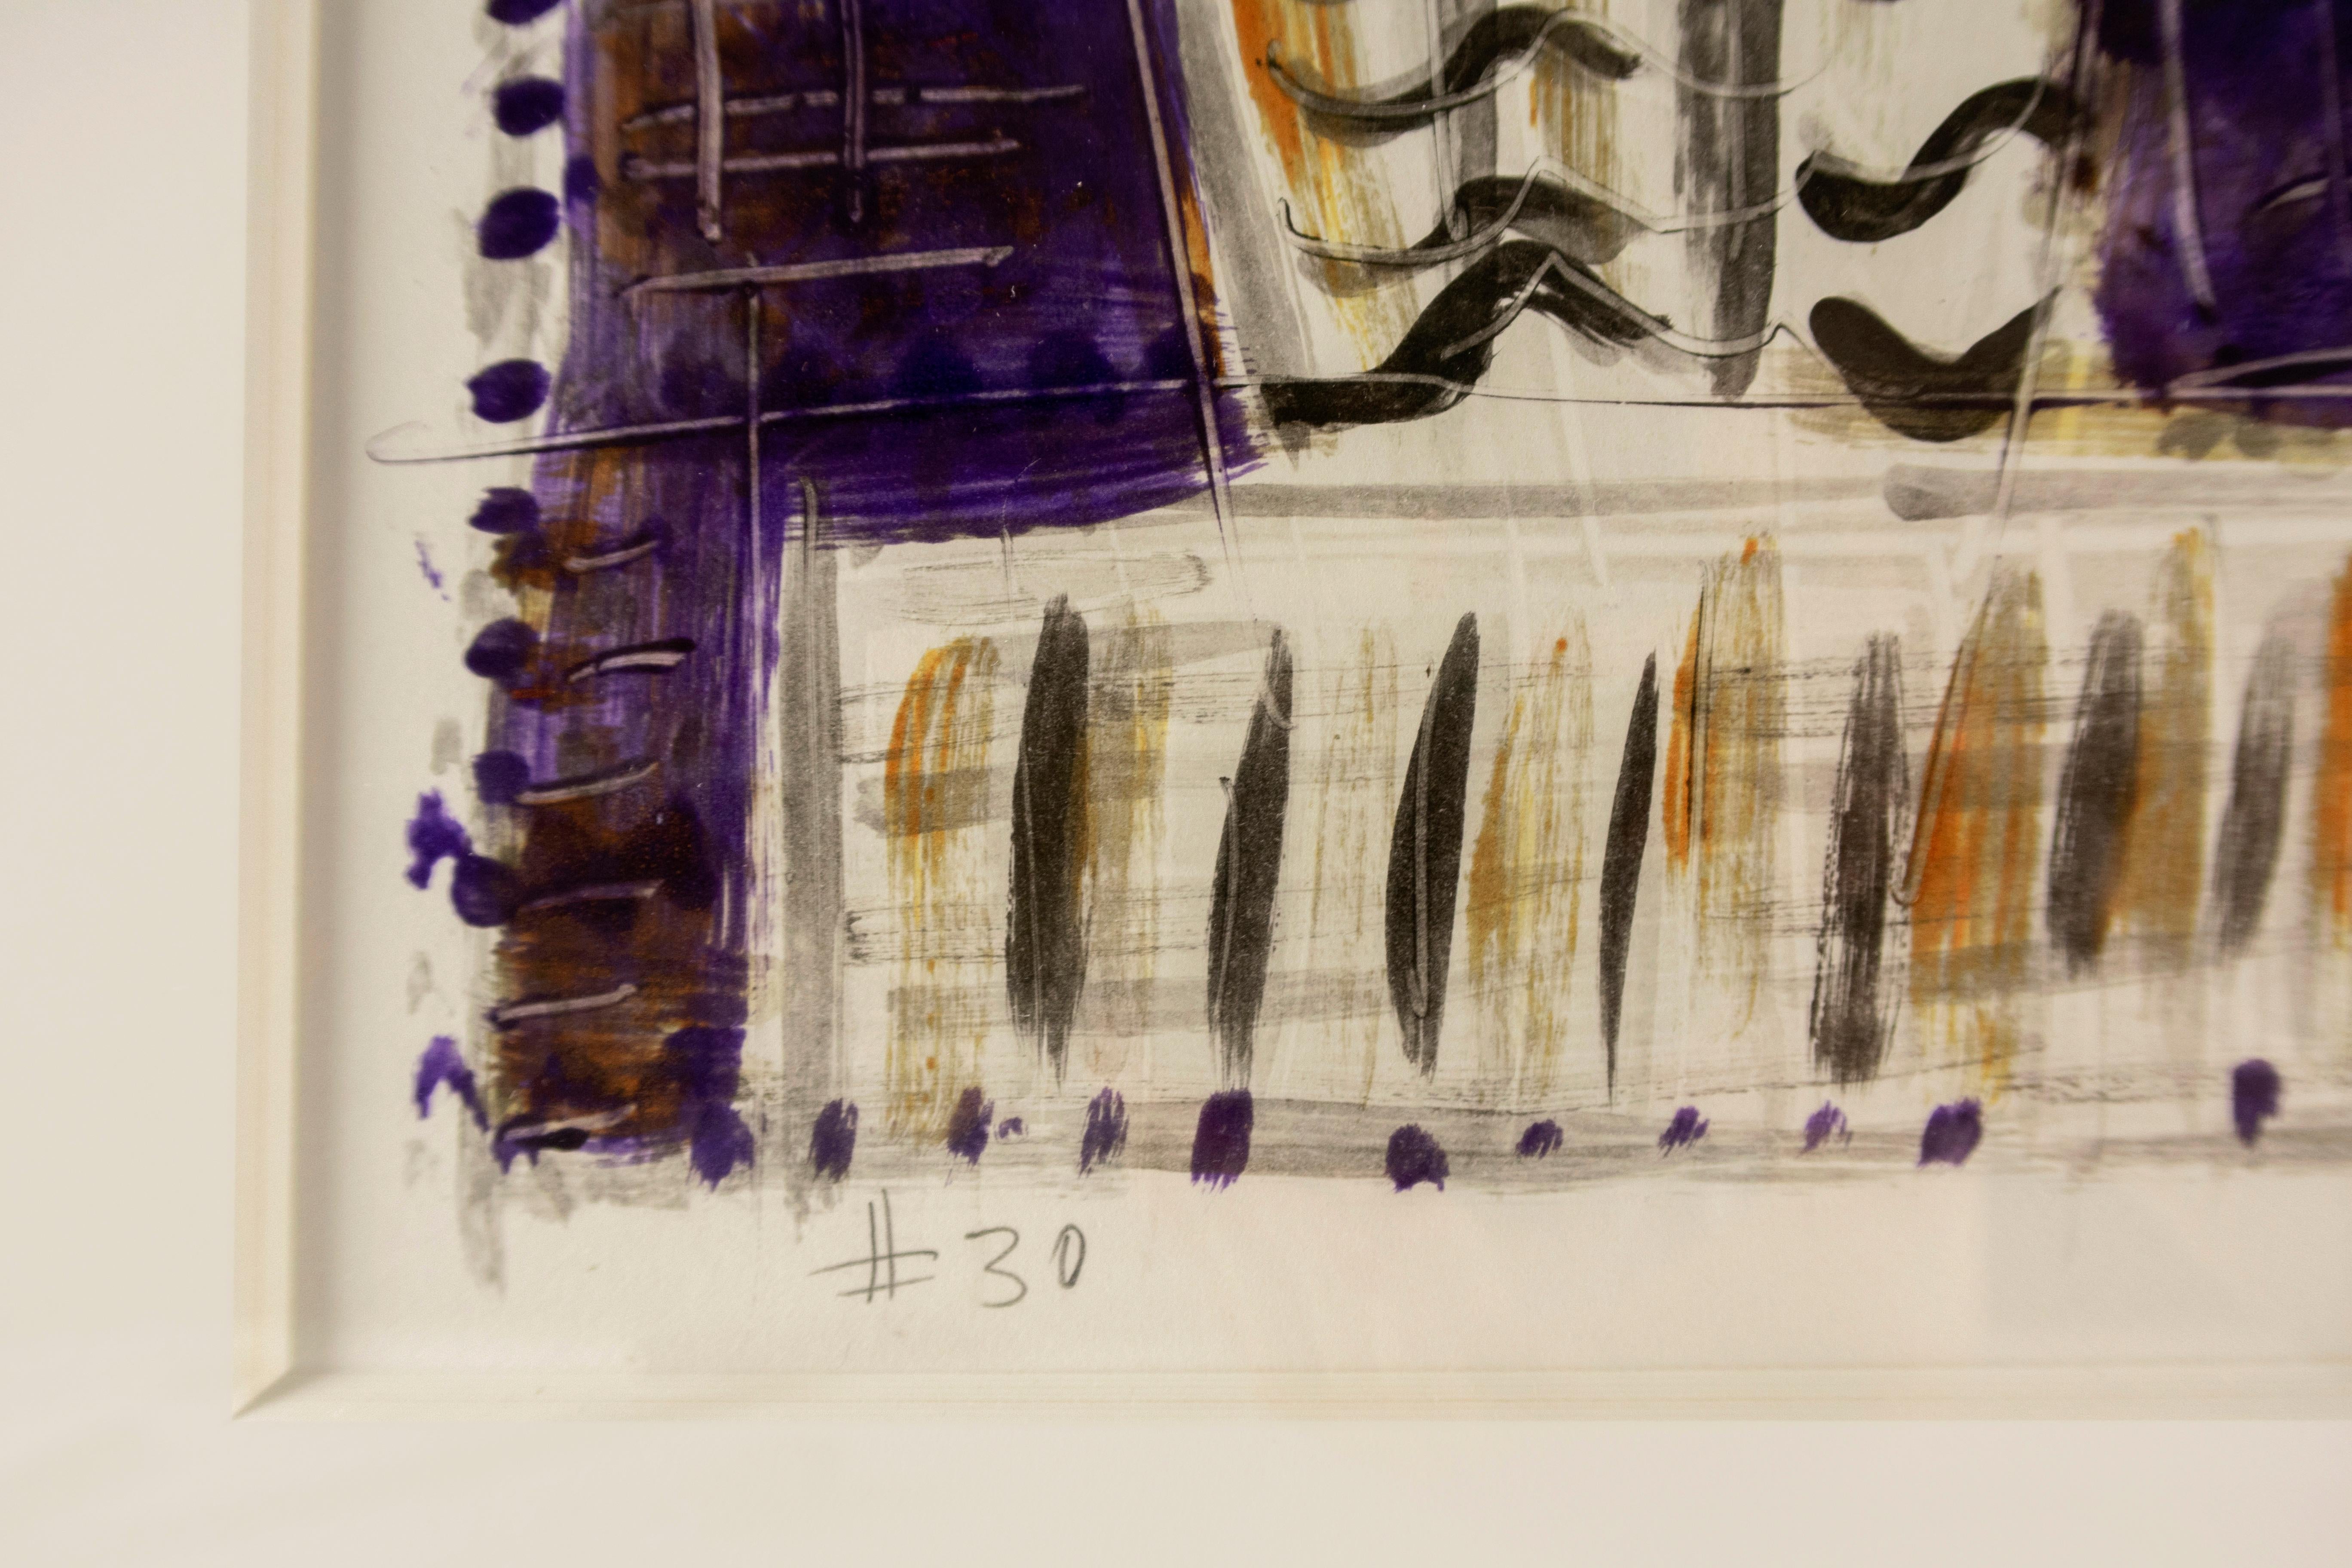 In this unique Michael Hurson monotype, stylized Greco-Roman pillars flank a plane of crosshatched and dotted texture in black, brown, and purple ink. The flat background, framed by columns, mimics the set of a theater production. The size and